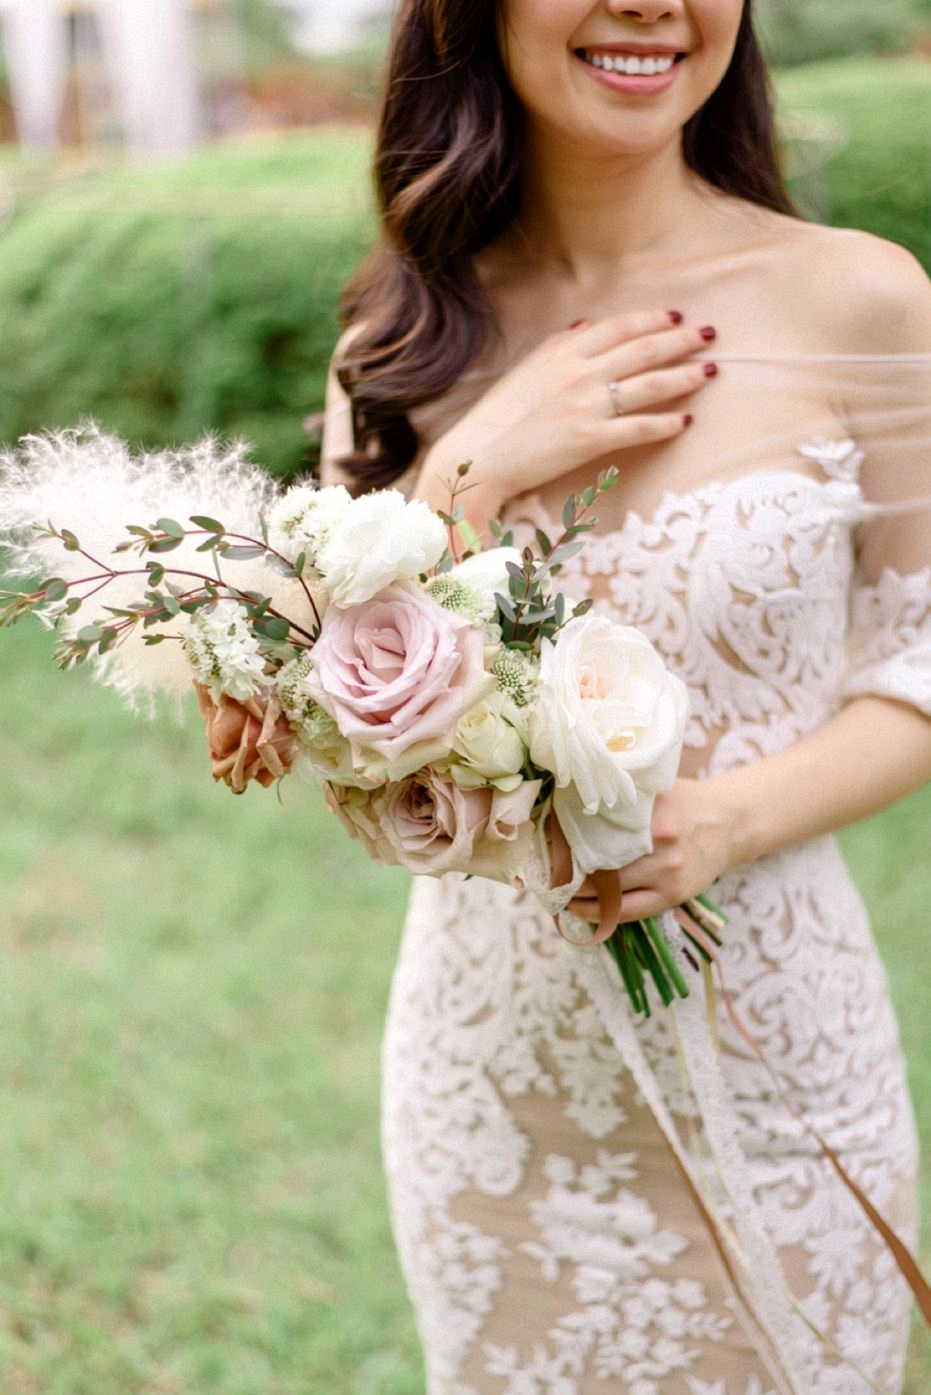 Arm Sheath, Cradle, Presentation and Pageant Bouquet Inspiration | see it all on onefabday.com